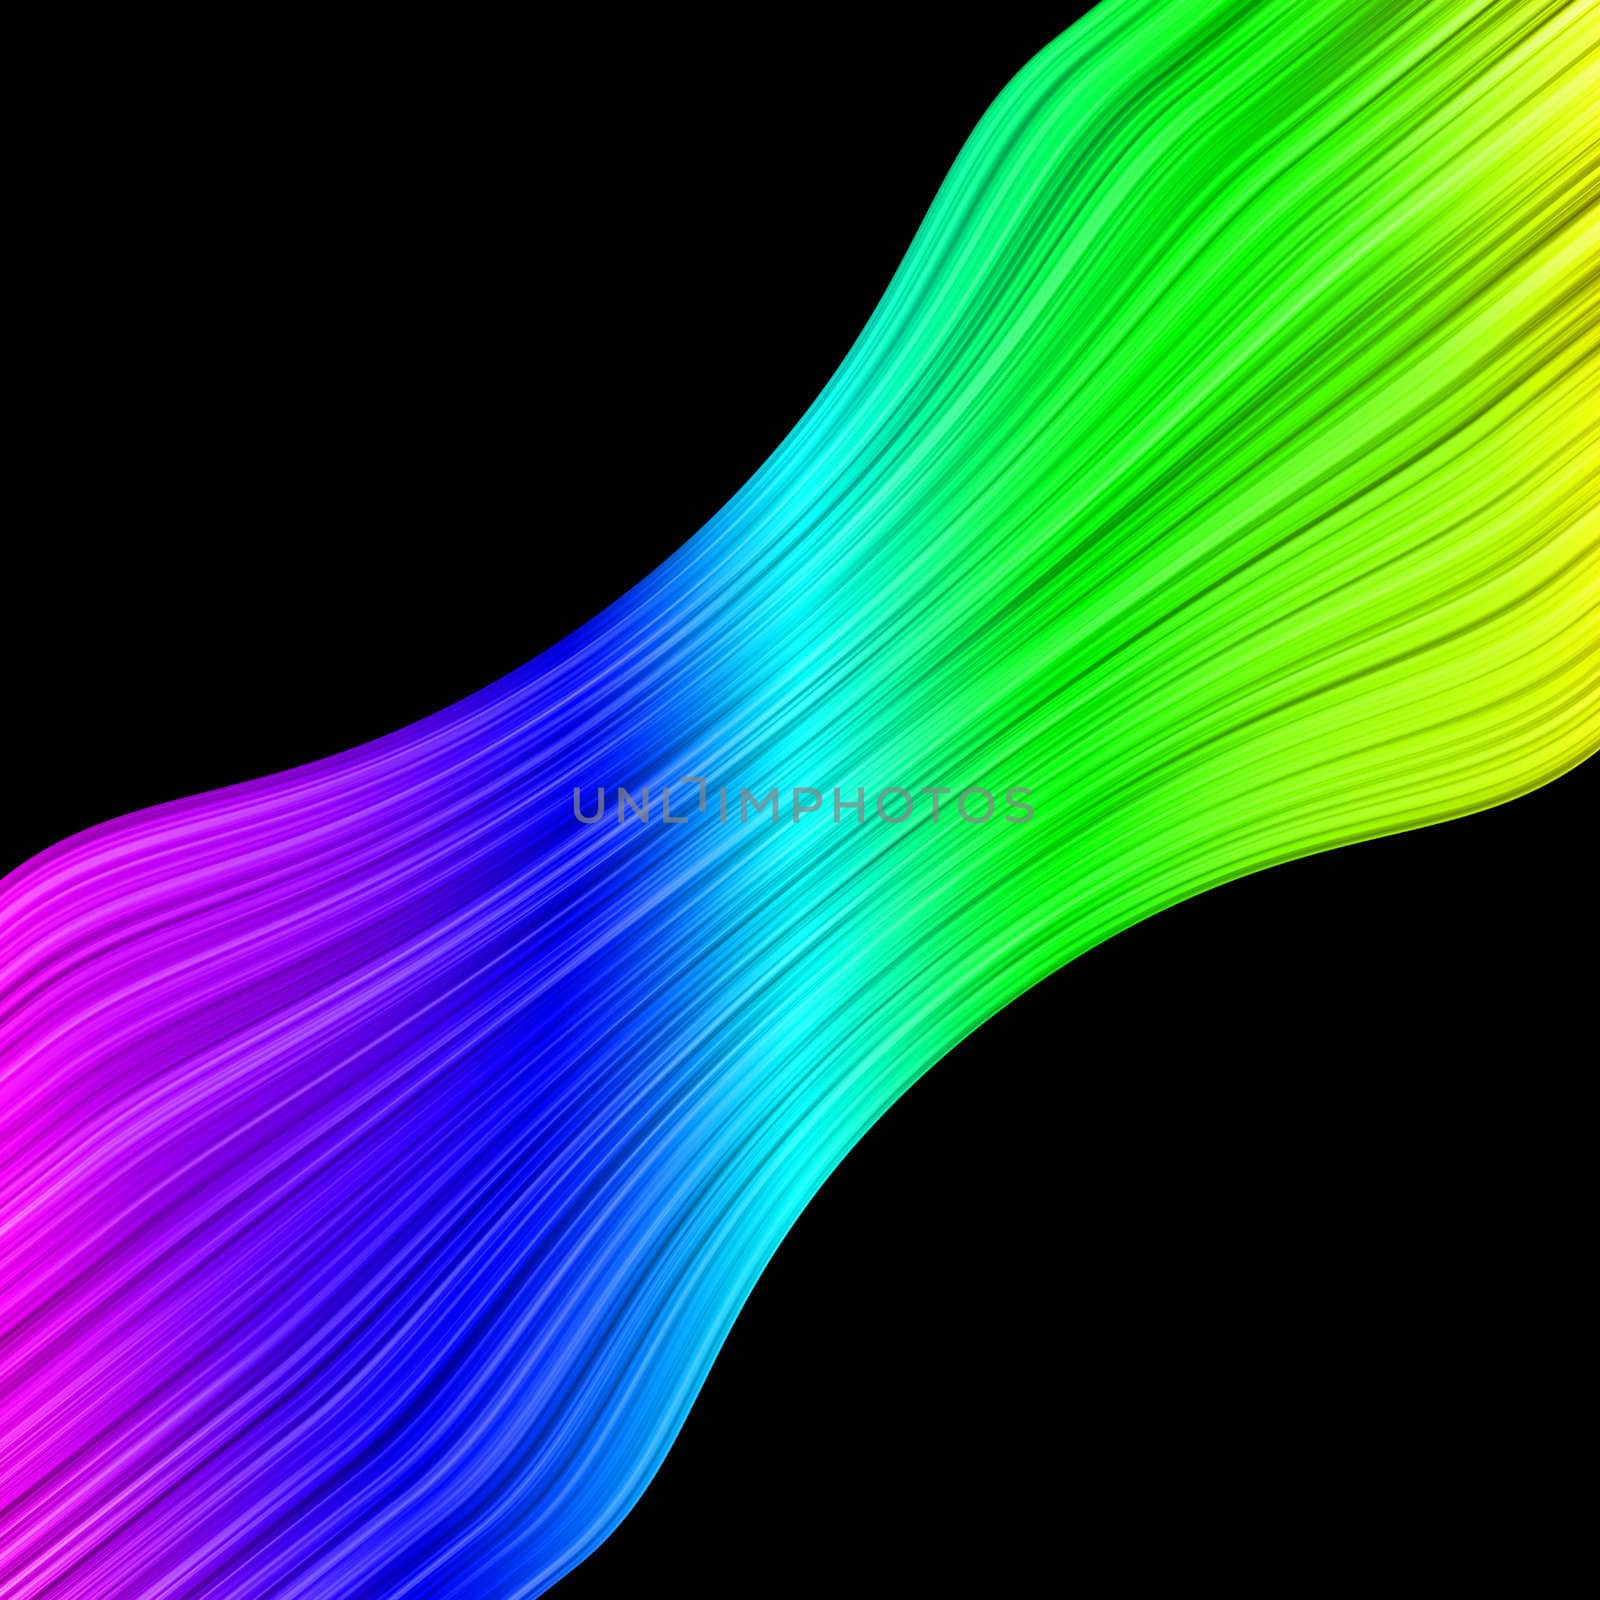 A simple abstract color based line pattern background.